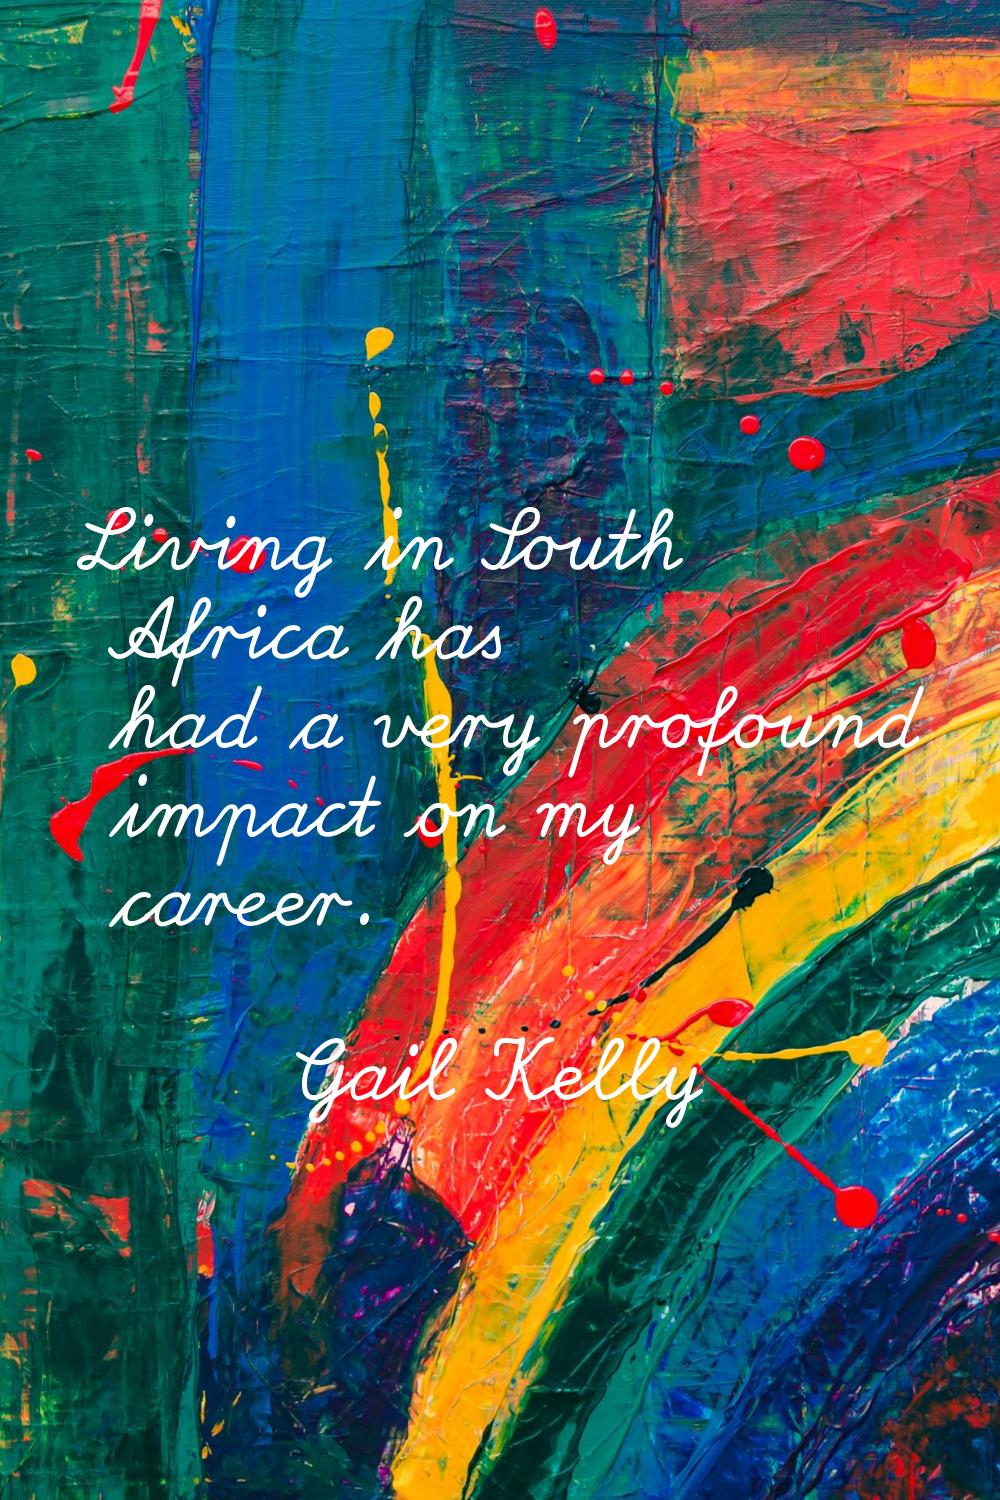 Living in South Africa has had a very profound impact on my career.